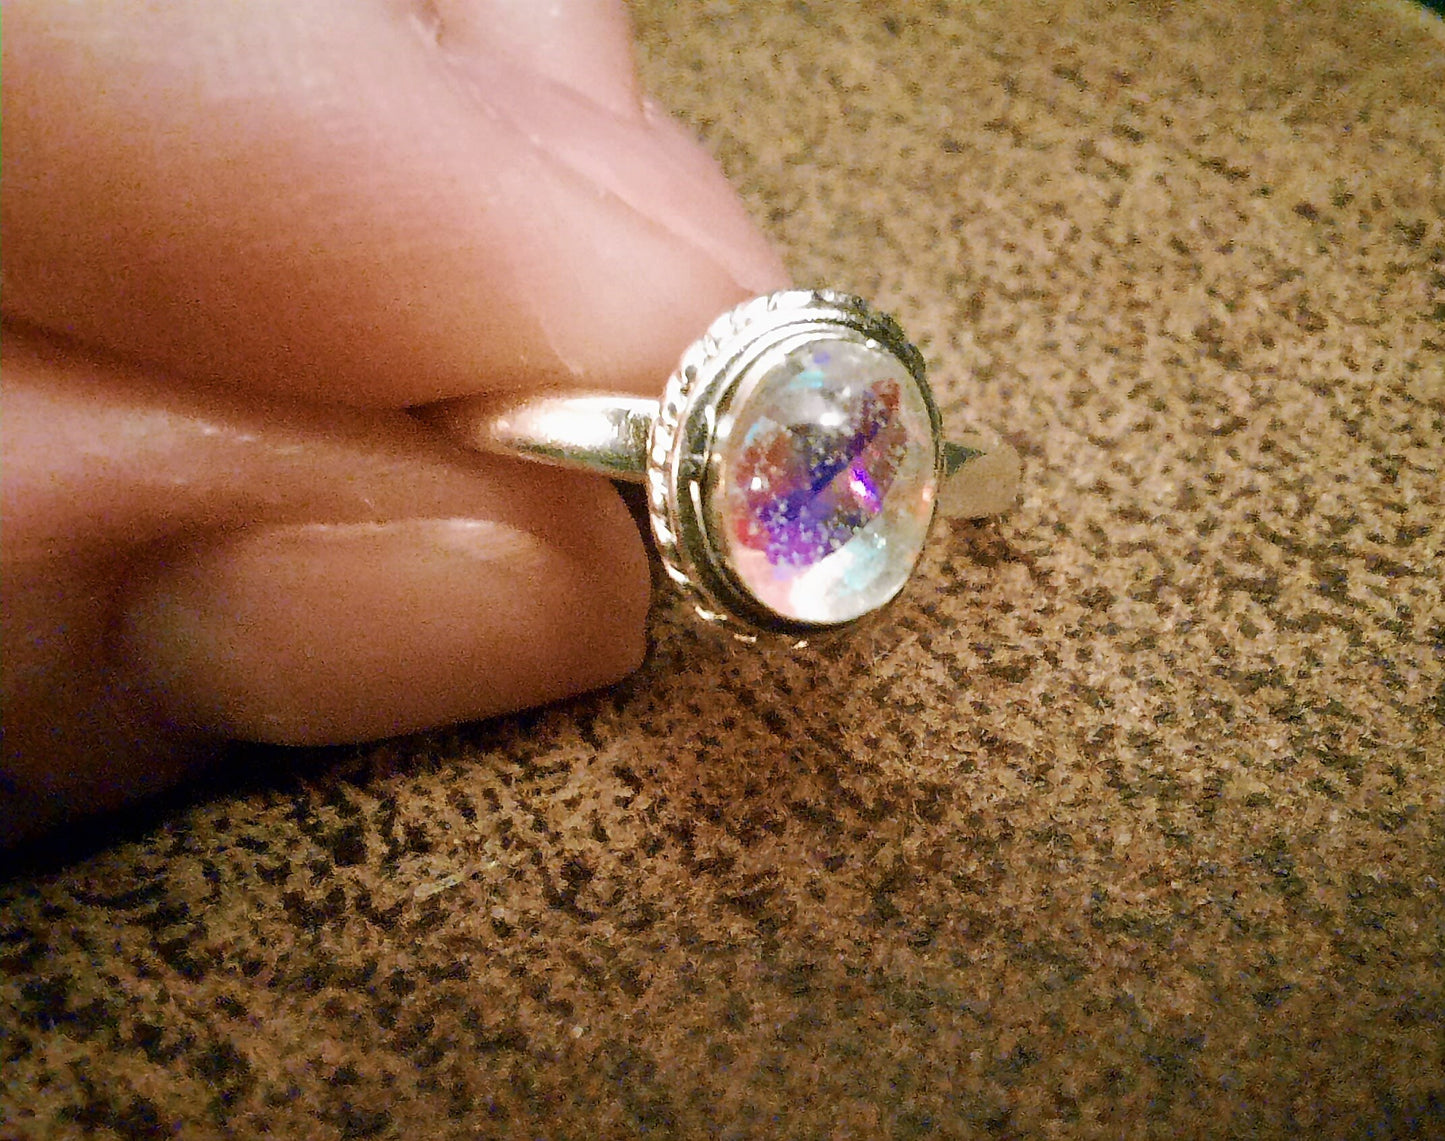 Handcrafted / Handmade Antiqued 925 Sterling Silver Ring, Twisted Rope Design, Iridescent Aurora Borealis, Domed with Holographic Resin